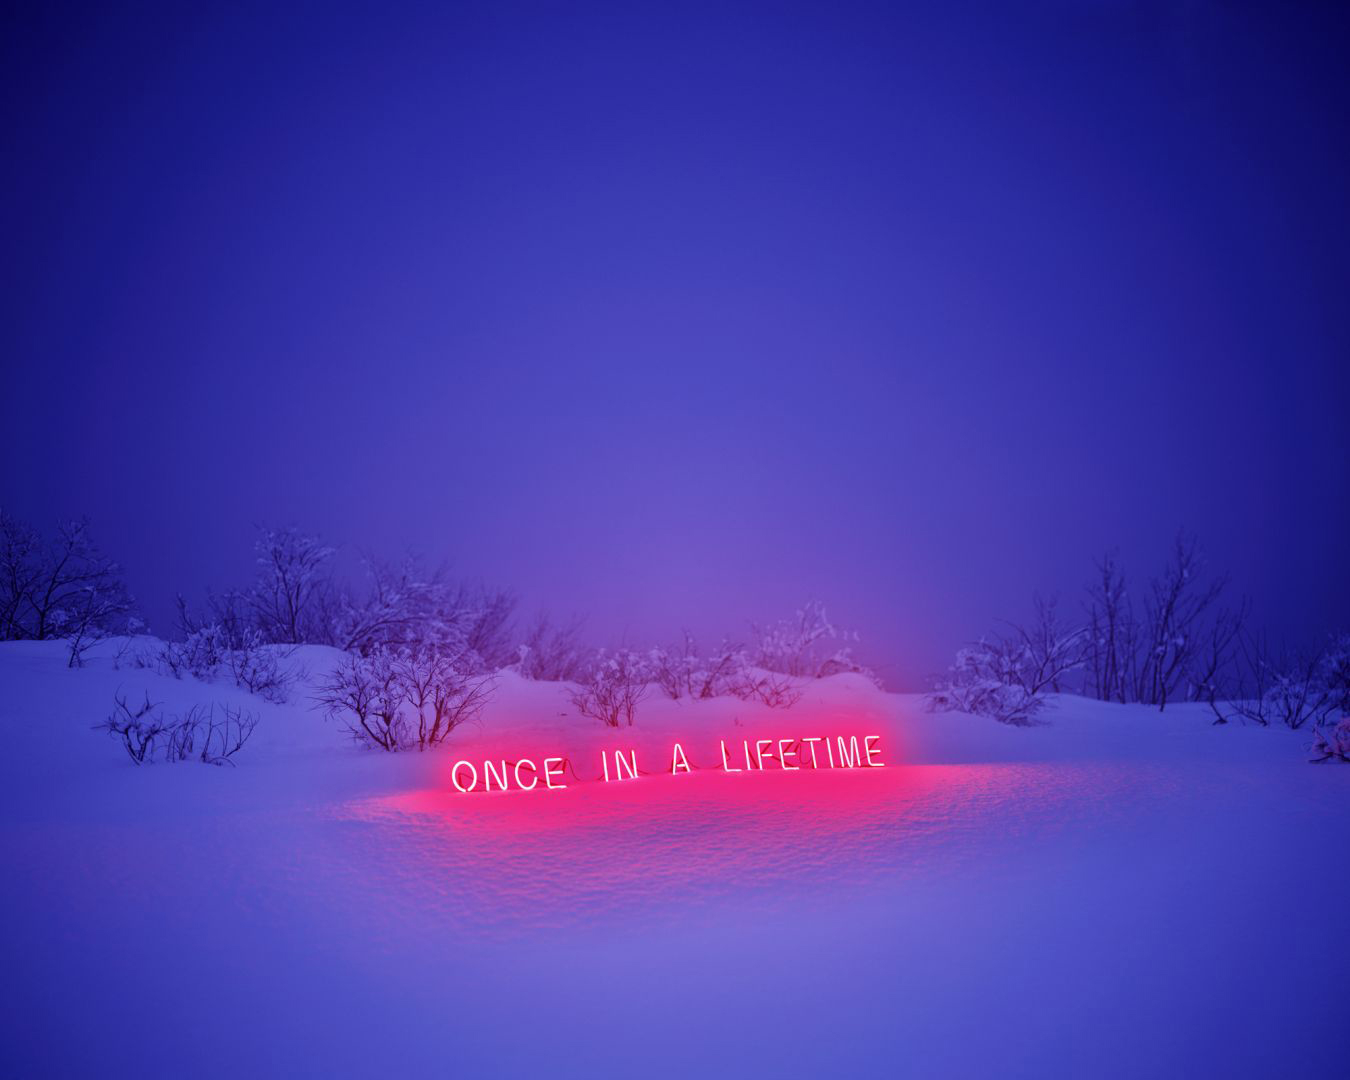 Jung LEE (*1972, South Korea): Once In A Lifetime – Christophe Guye Galerie